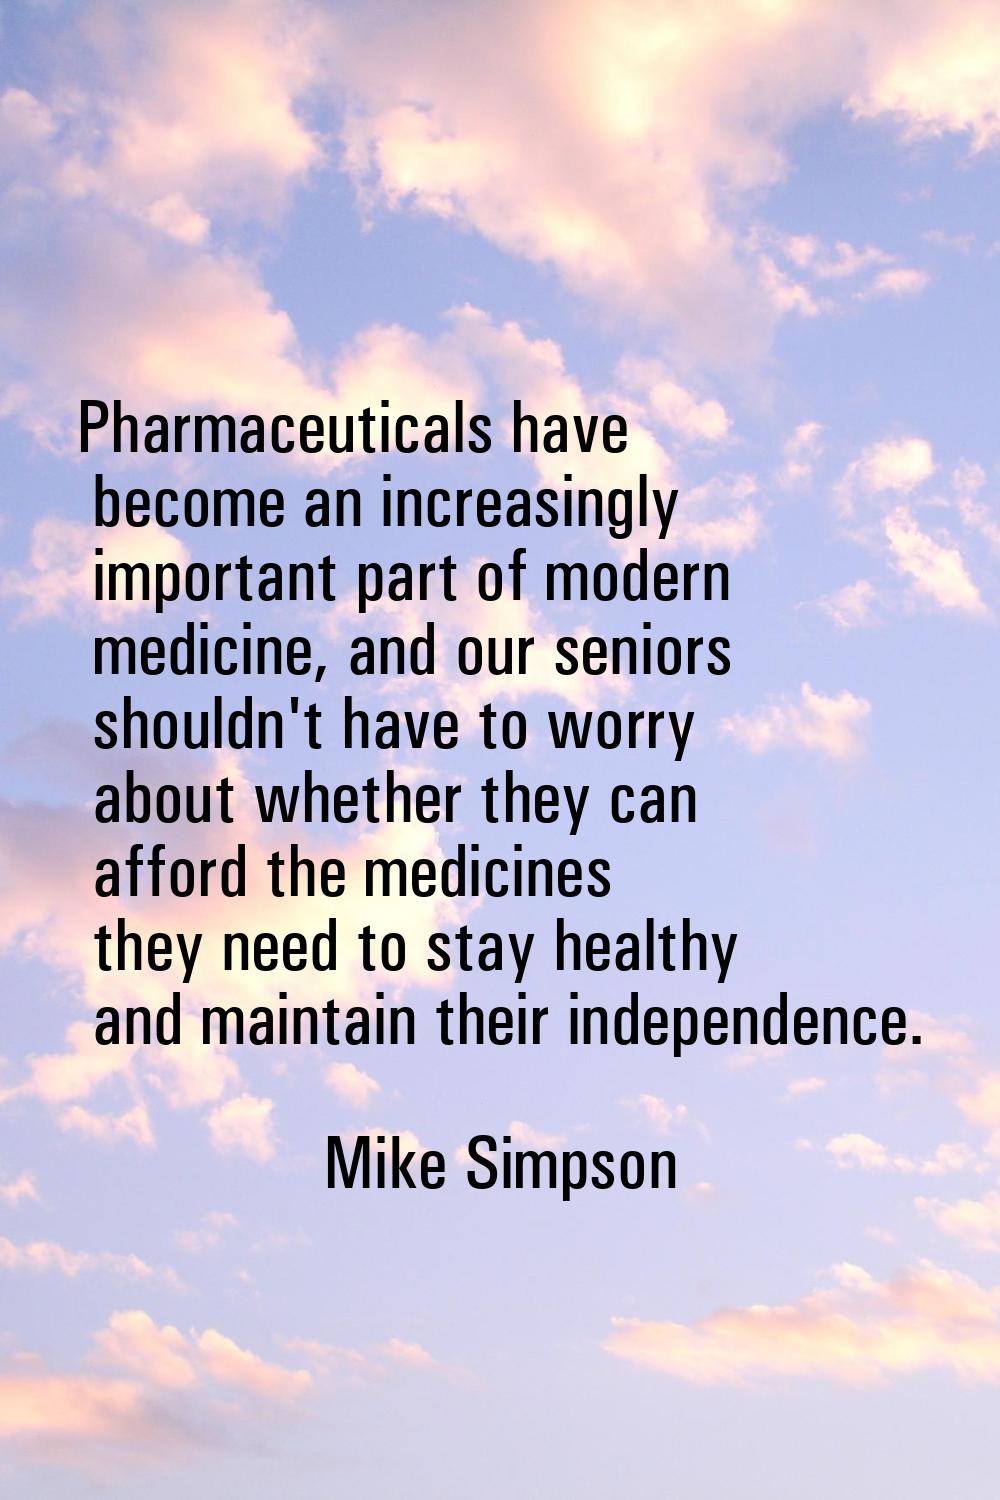 Pharmaceuticals have become an increasingly important part of modern medicine, and our seniors shou